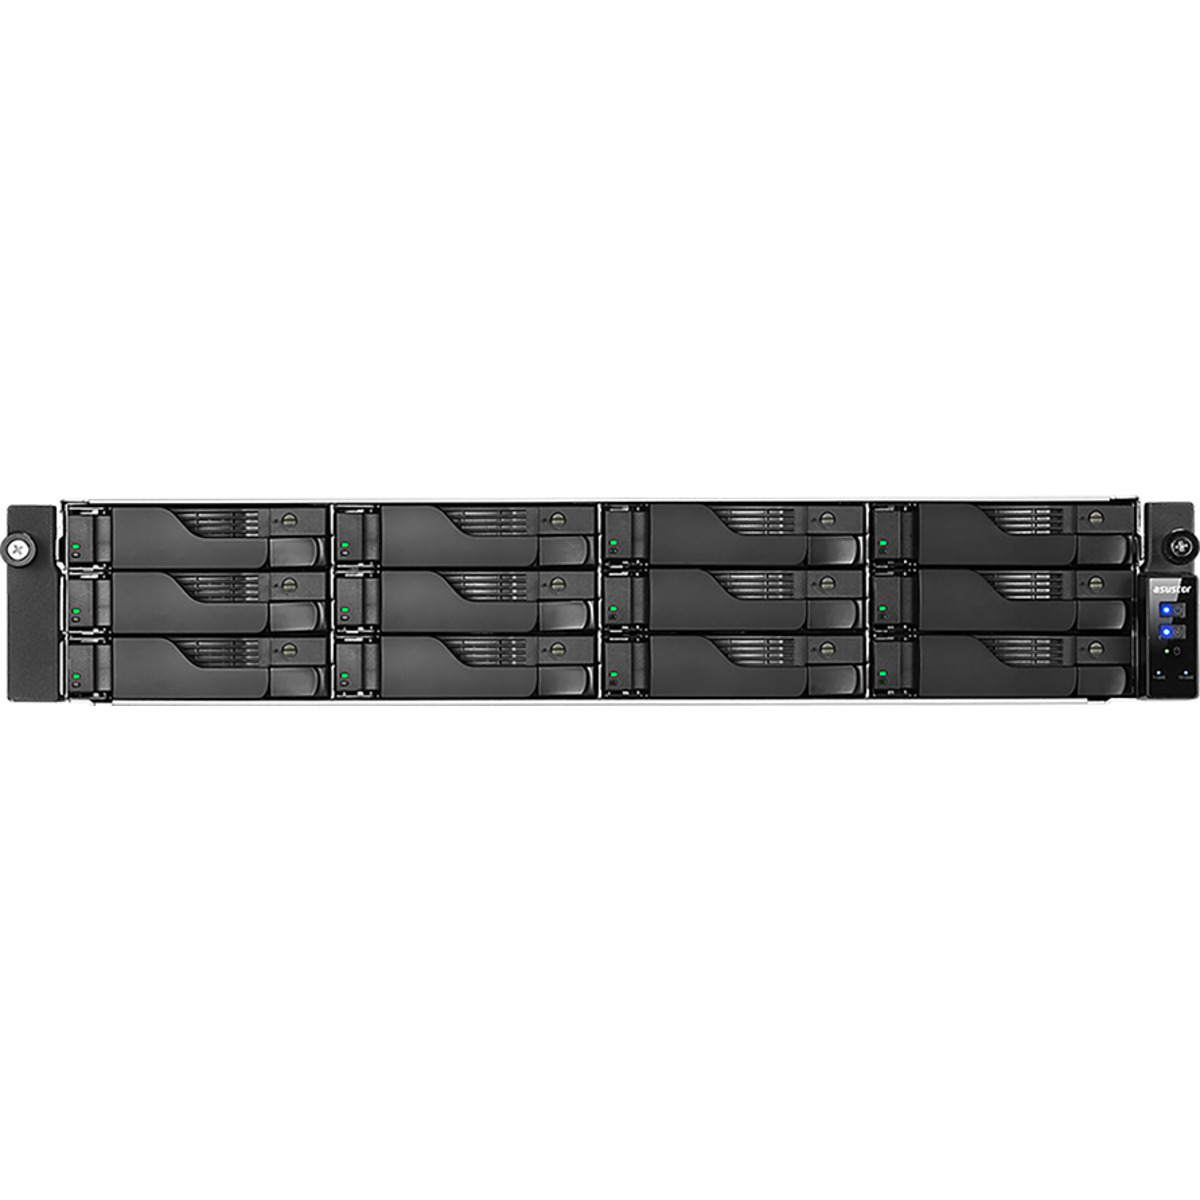 ASUSTOR LOCKERSTOR 12RD AS6512RD 28tb 12-Bay RackMount Multimedia / Power User / Business NAS - Network Attached Storage Device 7x4tb Samsung 870 EVO MZ-77E4T0BAM 2.5 560/530MB/s SATA 6Gb/s SSD CONSUMER Class Drives Installed - Burn-In Tested - ON SALE - FREE RAM UPGRADE LOCKERSTOR 12RD AS6512RD